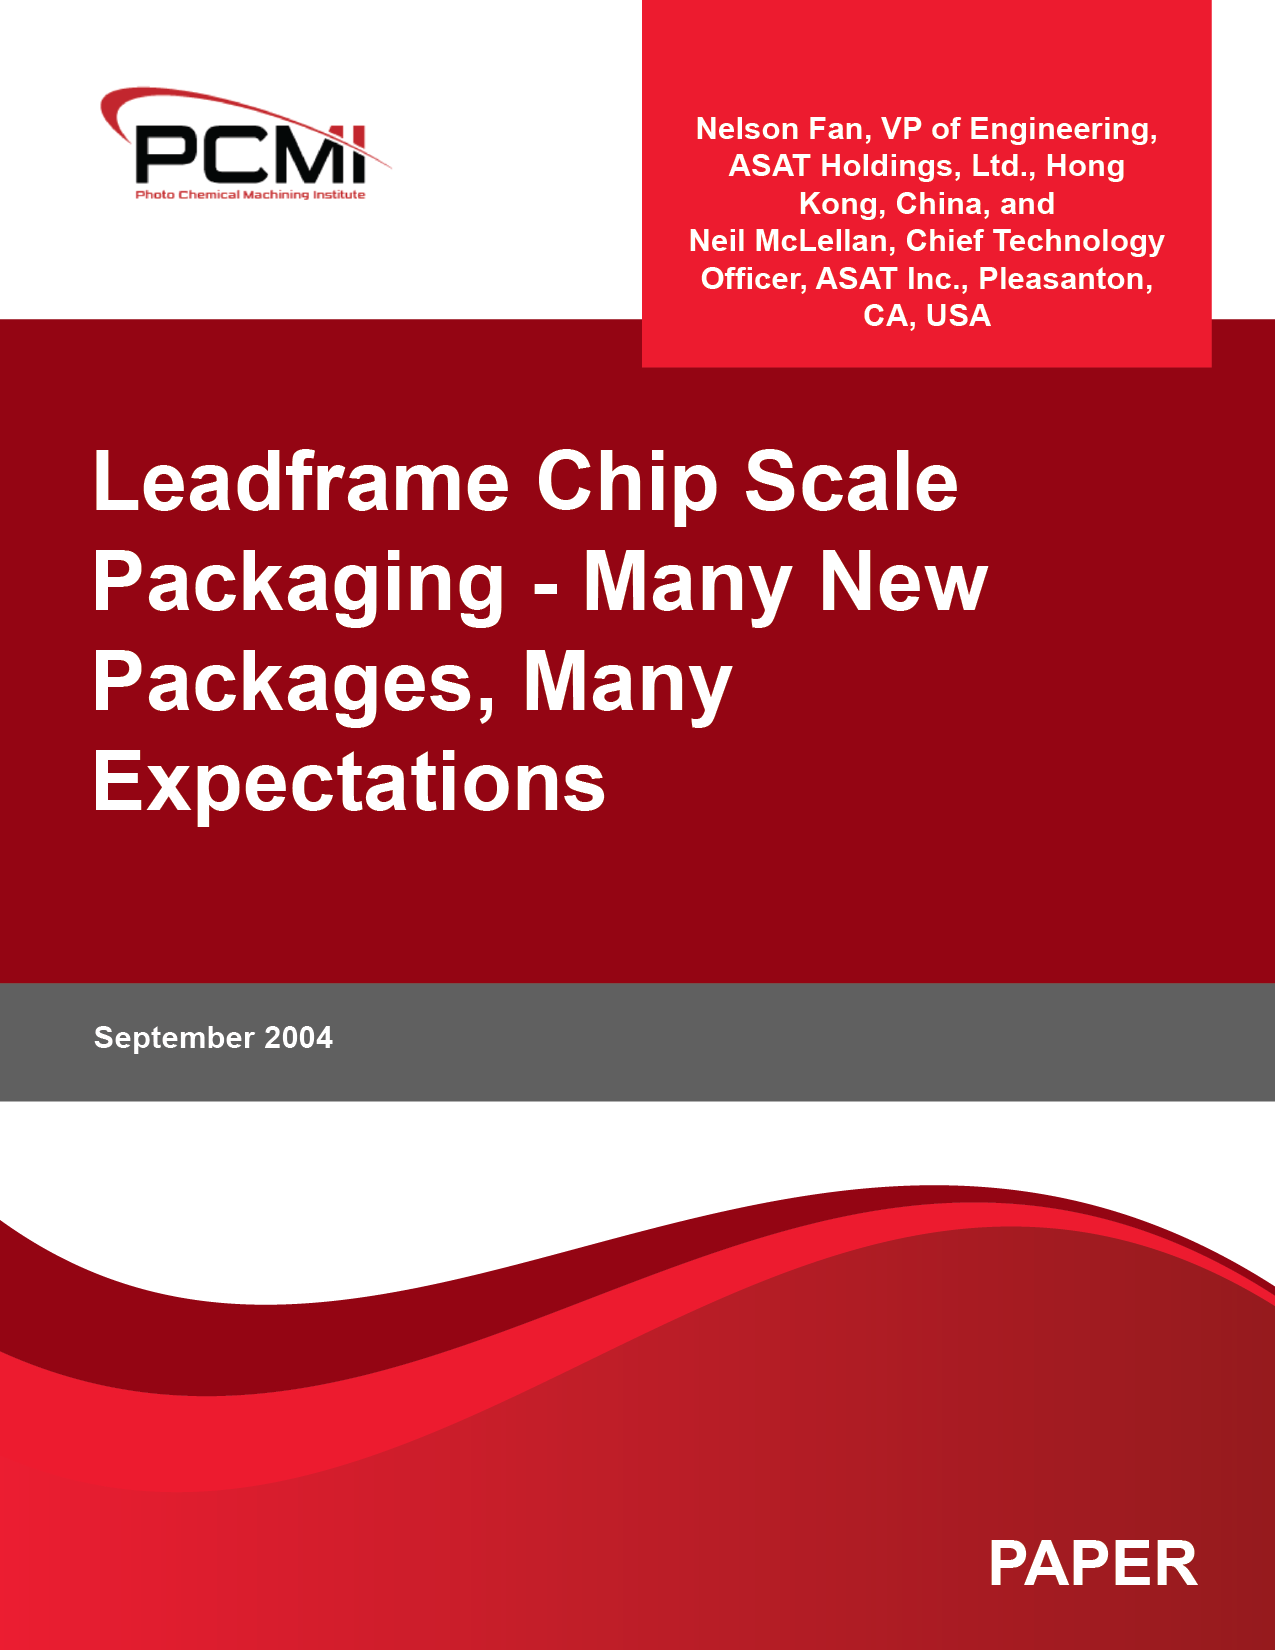 Leadframe Chip Scale Packaging – Many New Packages, Many Expectations